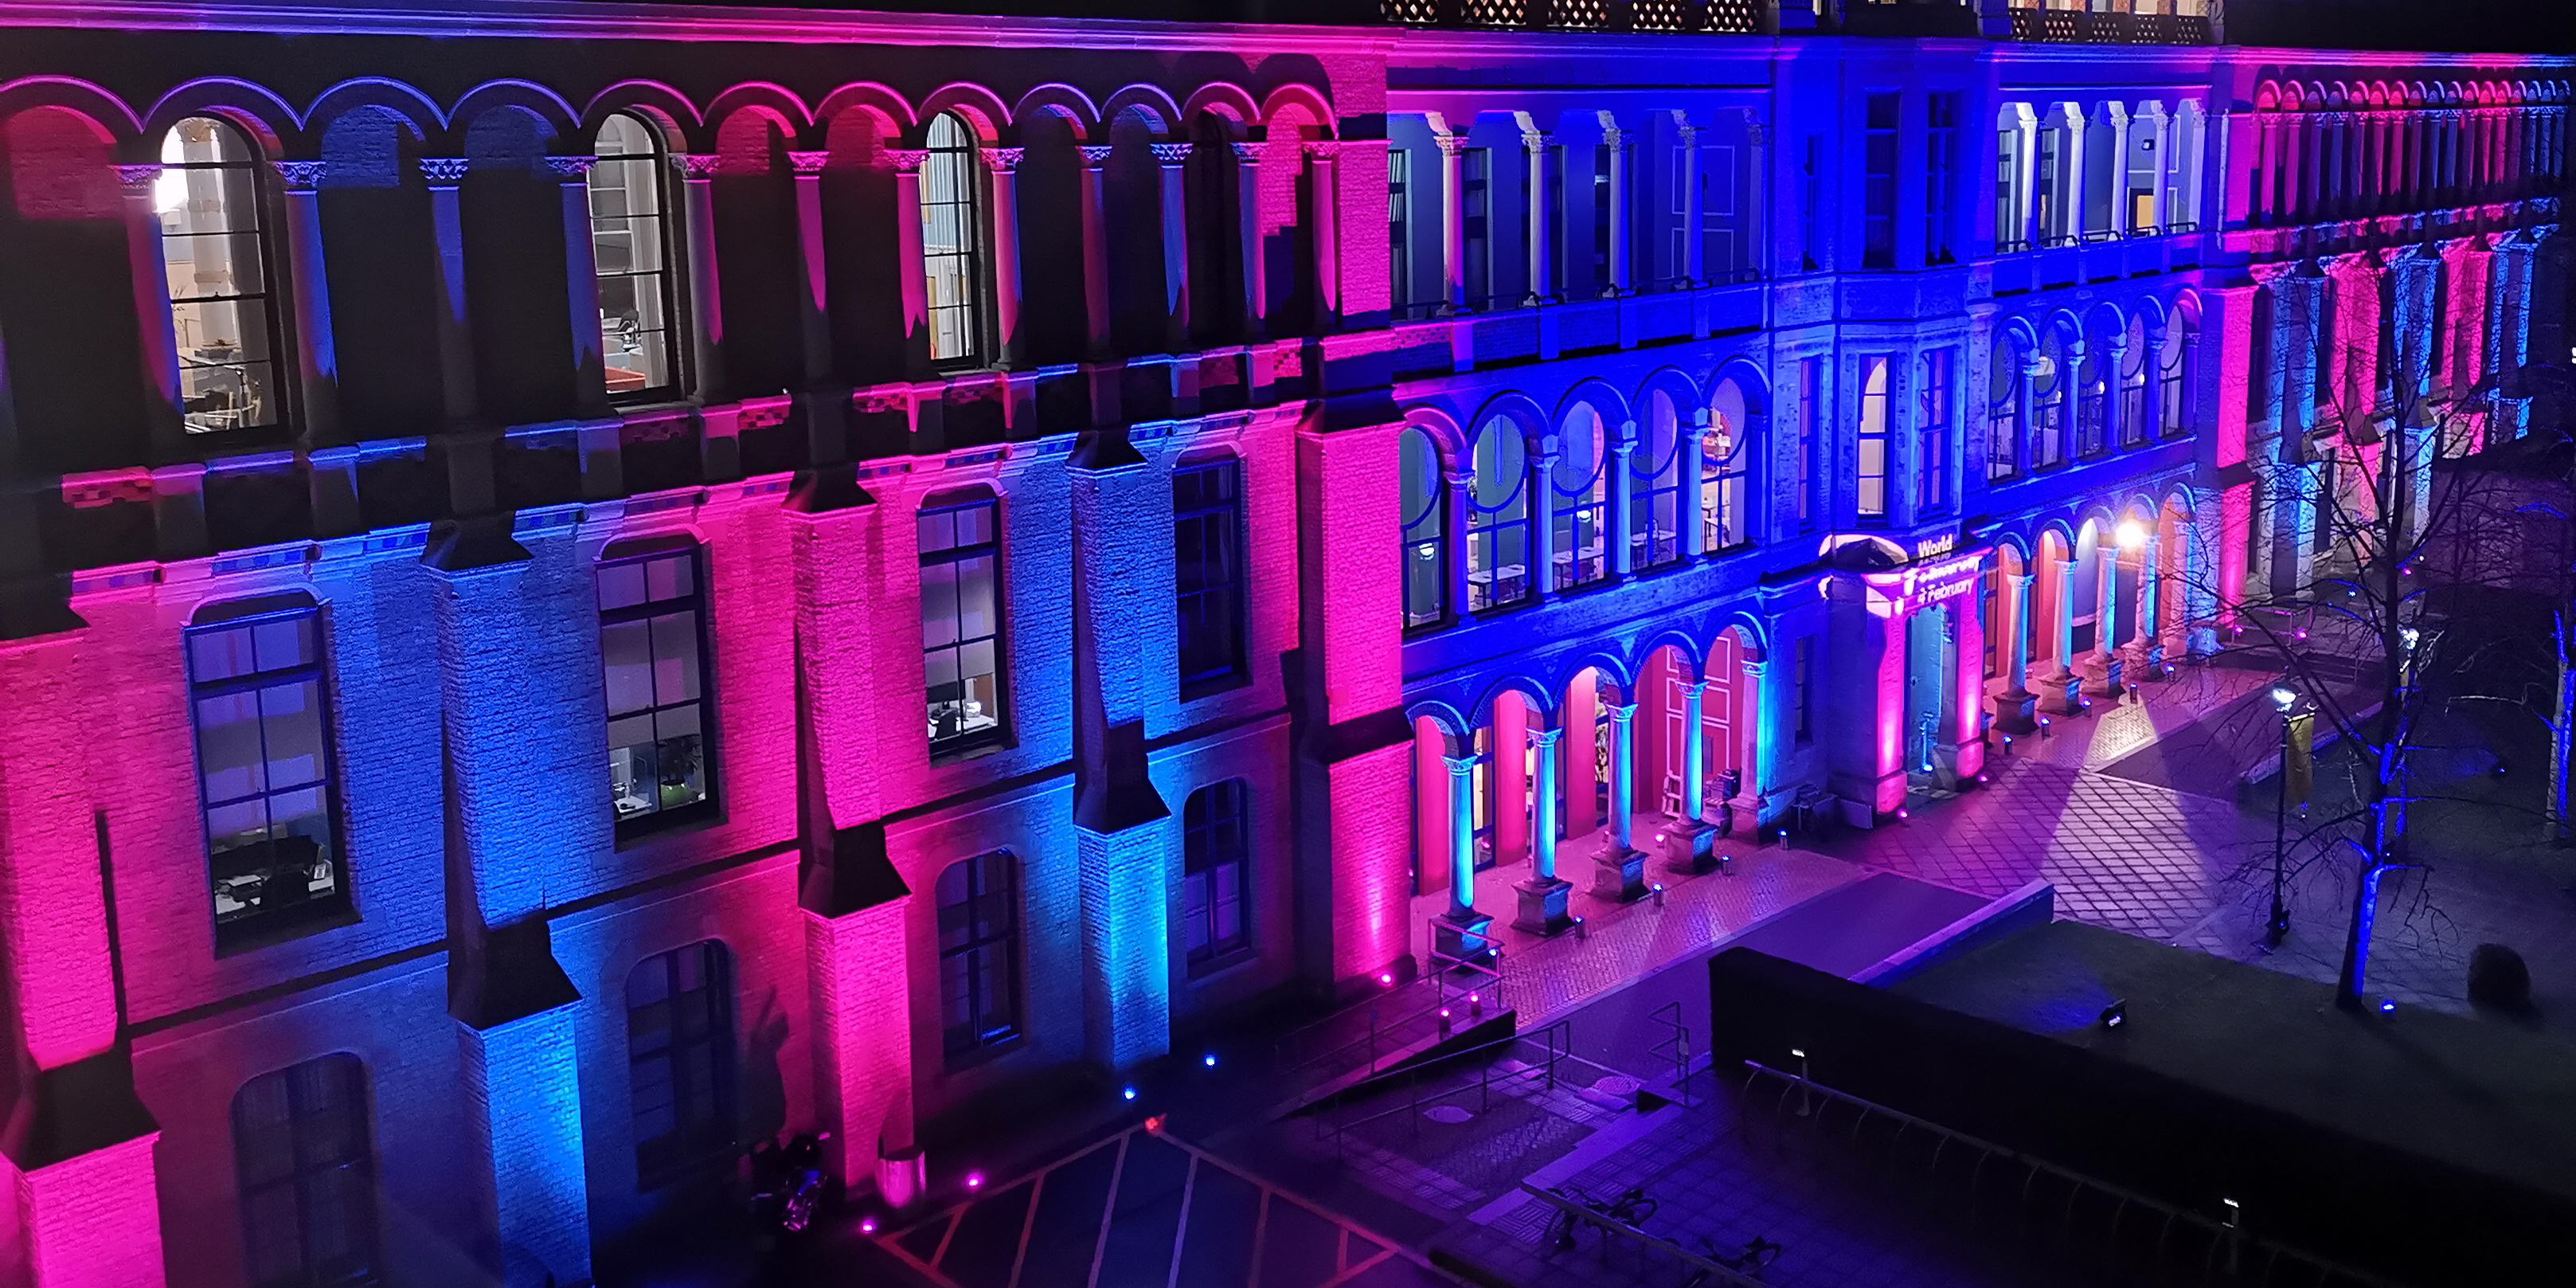 Cambridge Judge Business School from above, illuminated in Cancer Research UK colours